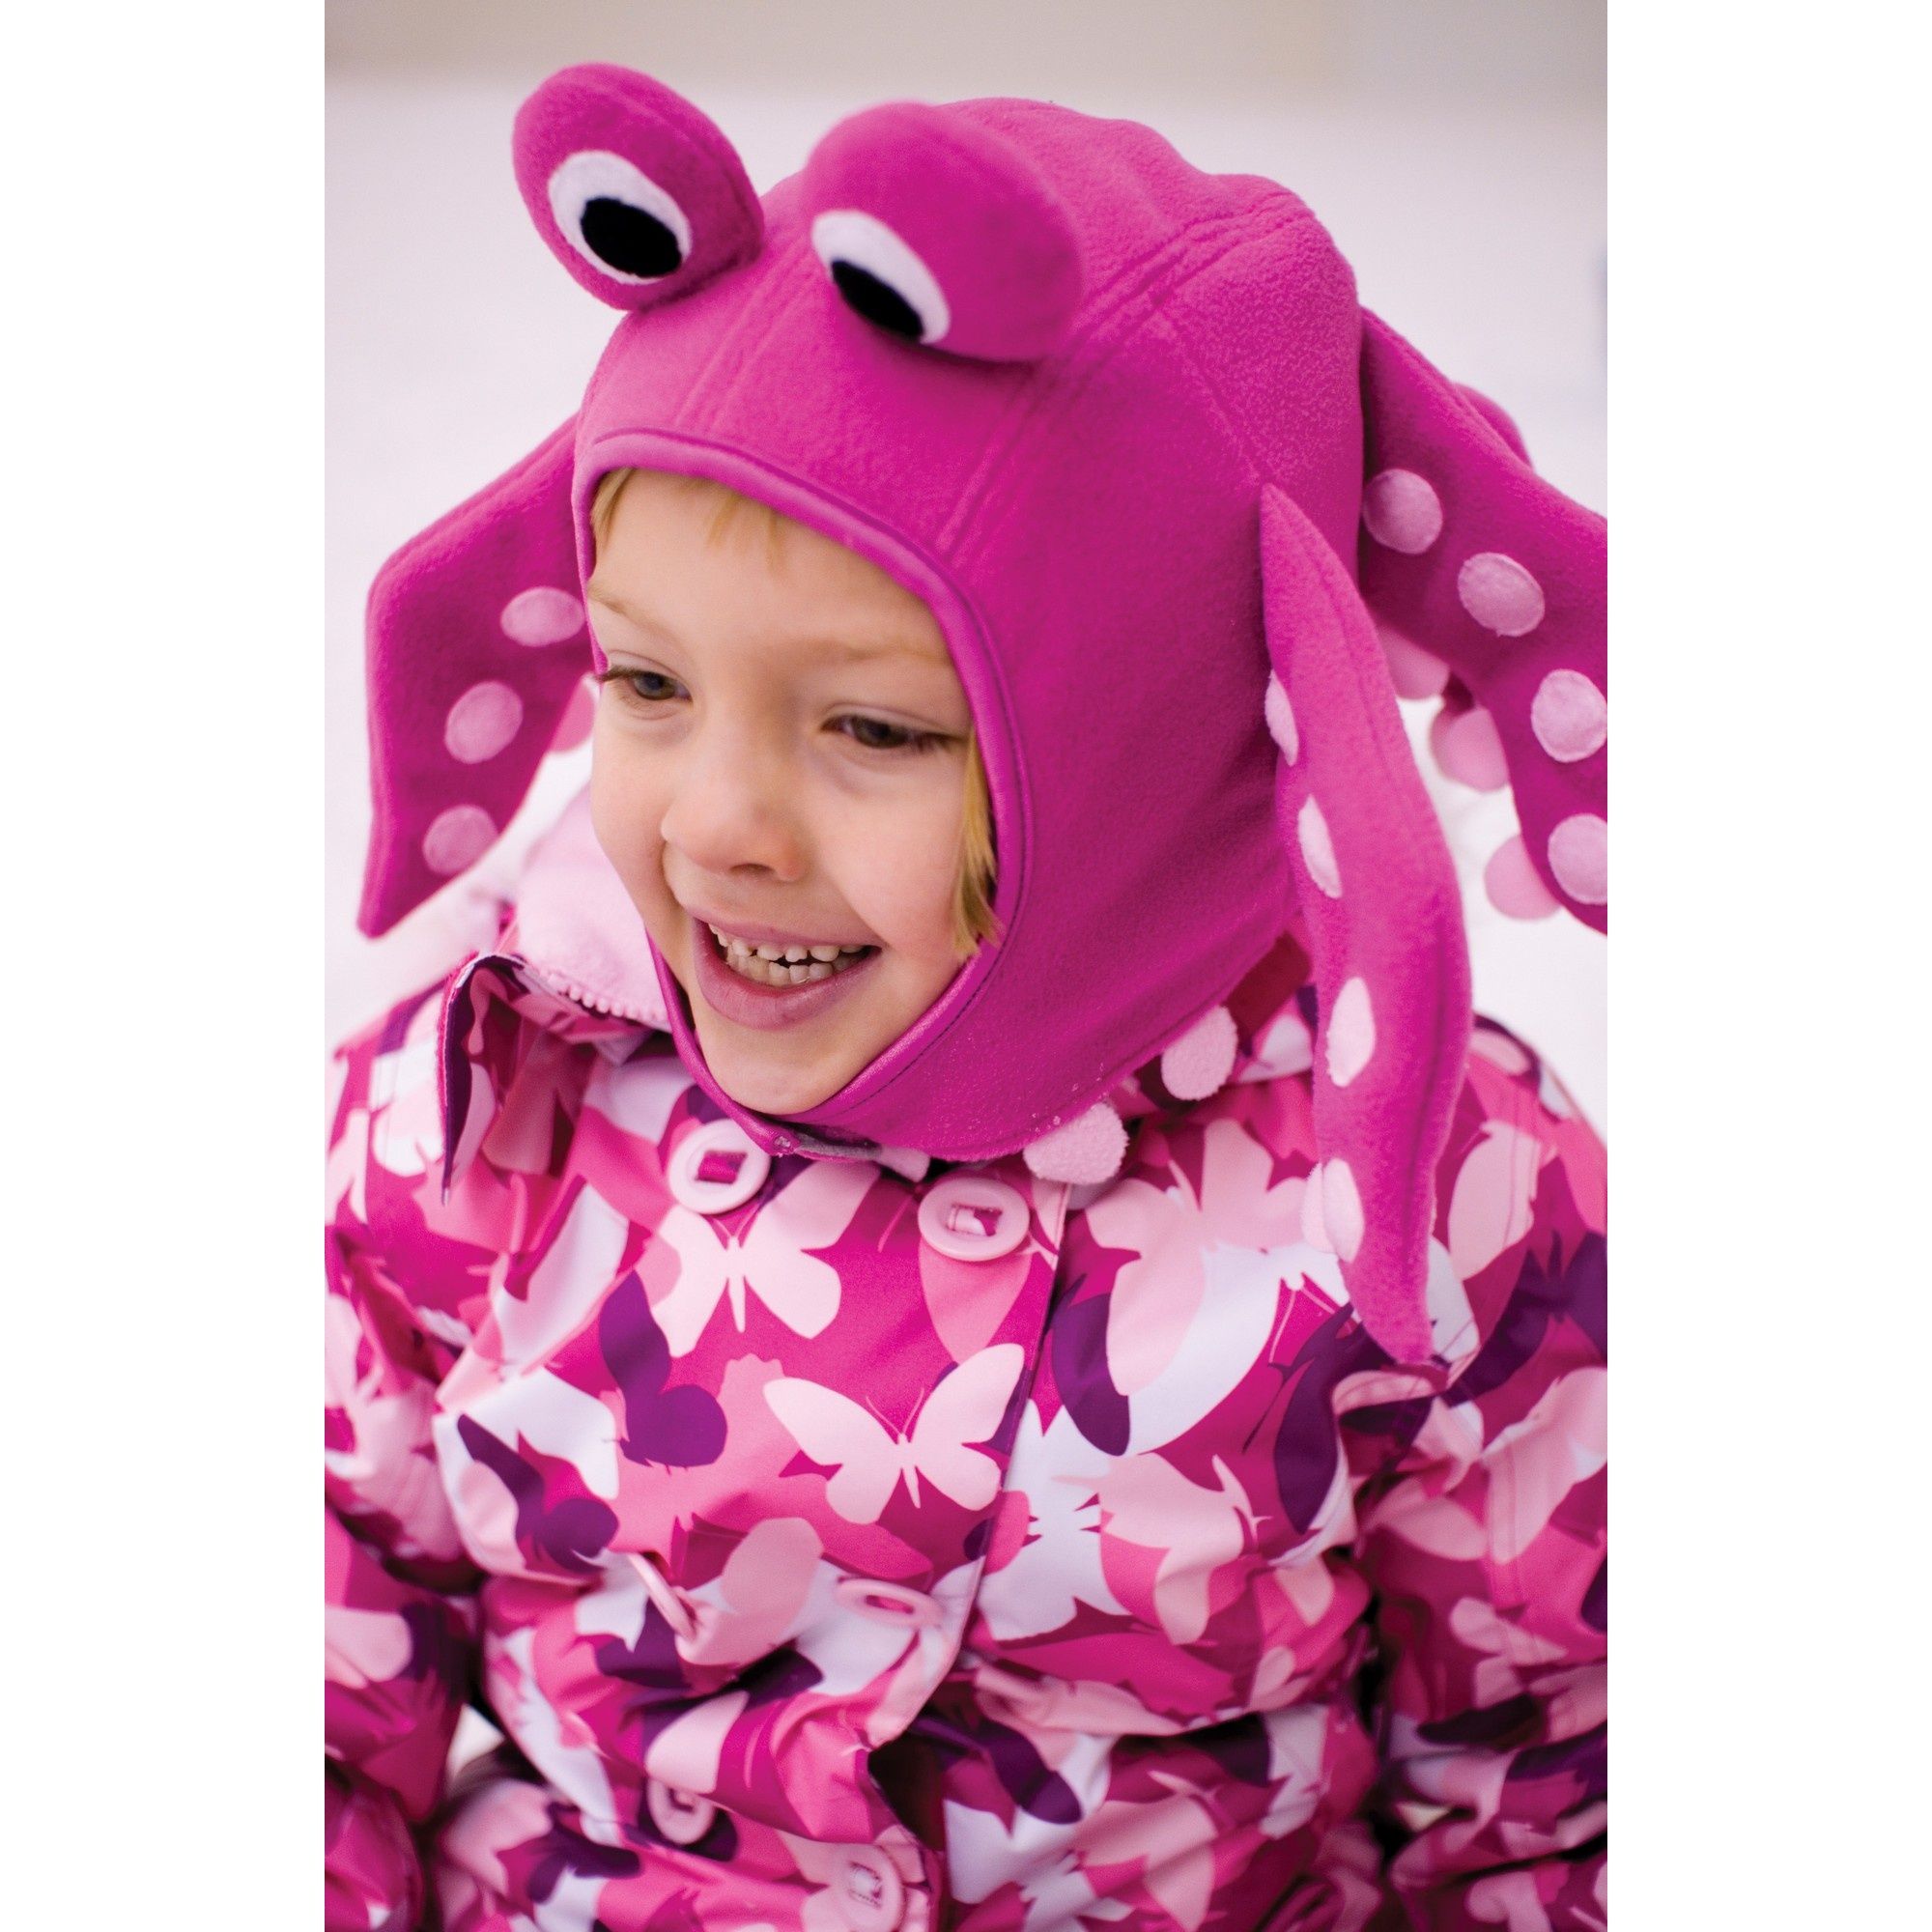 Novelty octopus balaclava, perfect for little adventurers who want to stay warm in fun style. Plus, this will make them almost impossible to lose sight of. Material: Shell: 100% Polyester Anti Pil Microfleece. Lining: 100% Cotton.